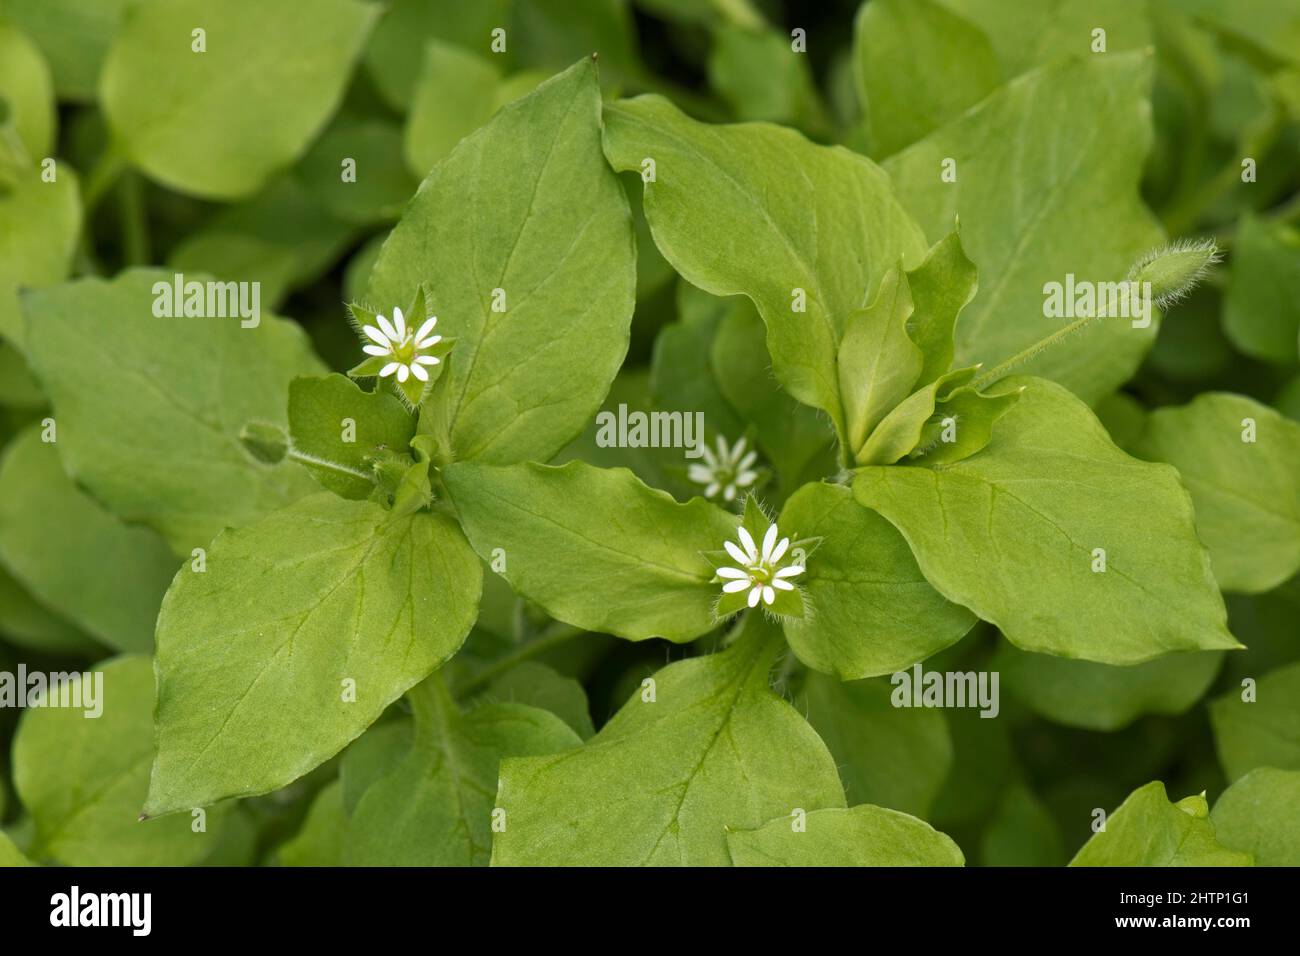 Chickweed (Stellaria media) acid green leaves and small white flowers on an annual weed, Berkshire, June Stock Photo